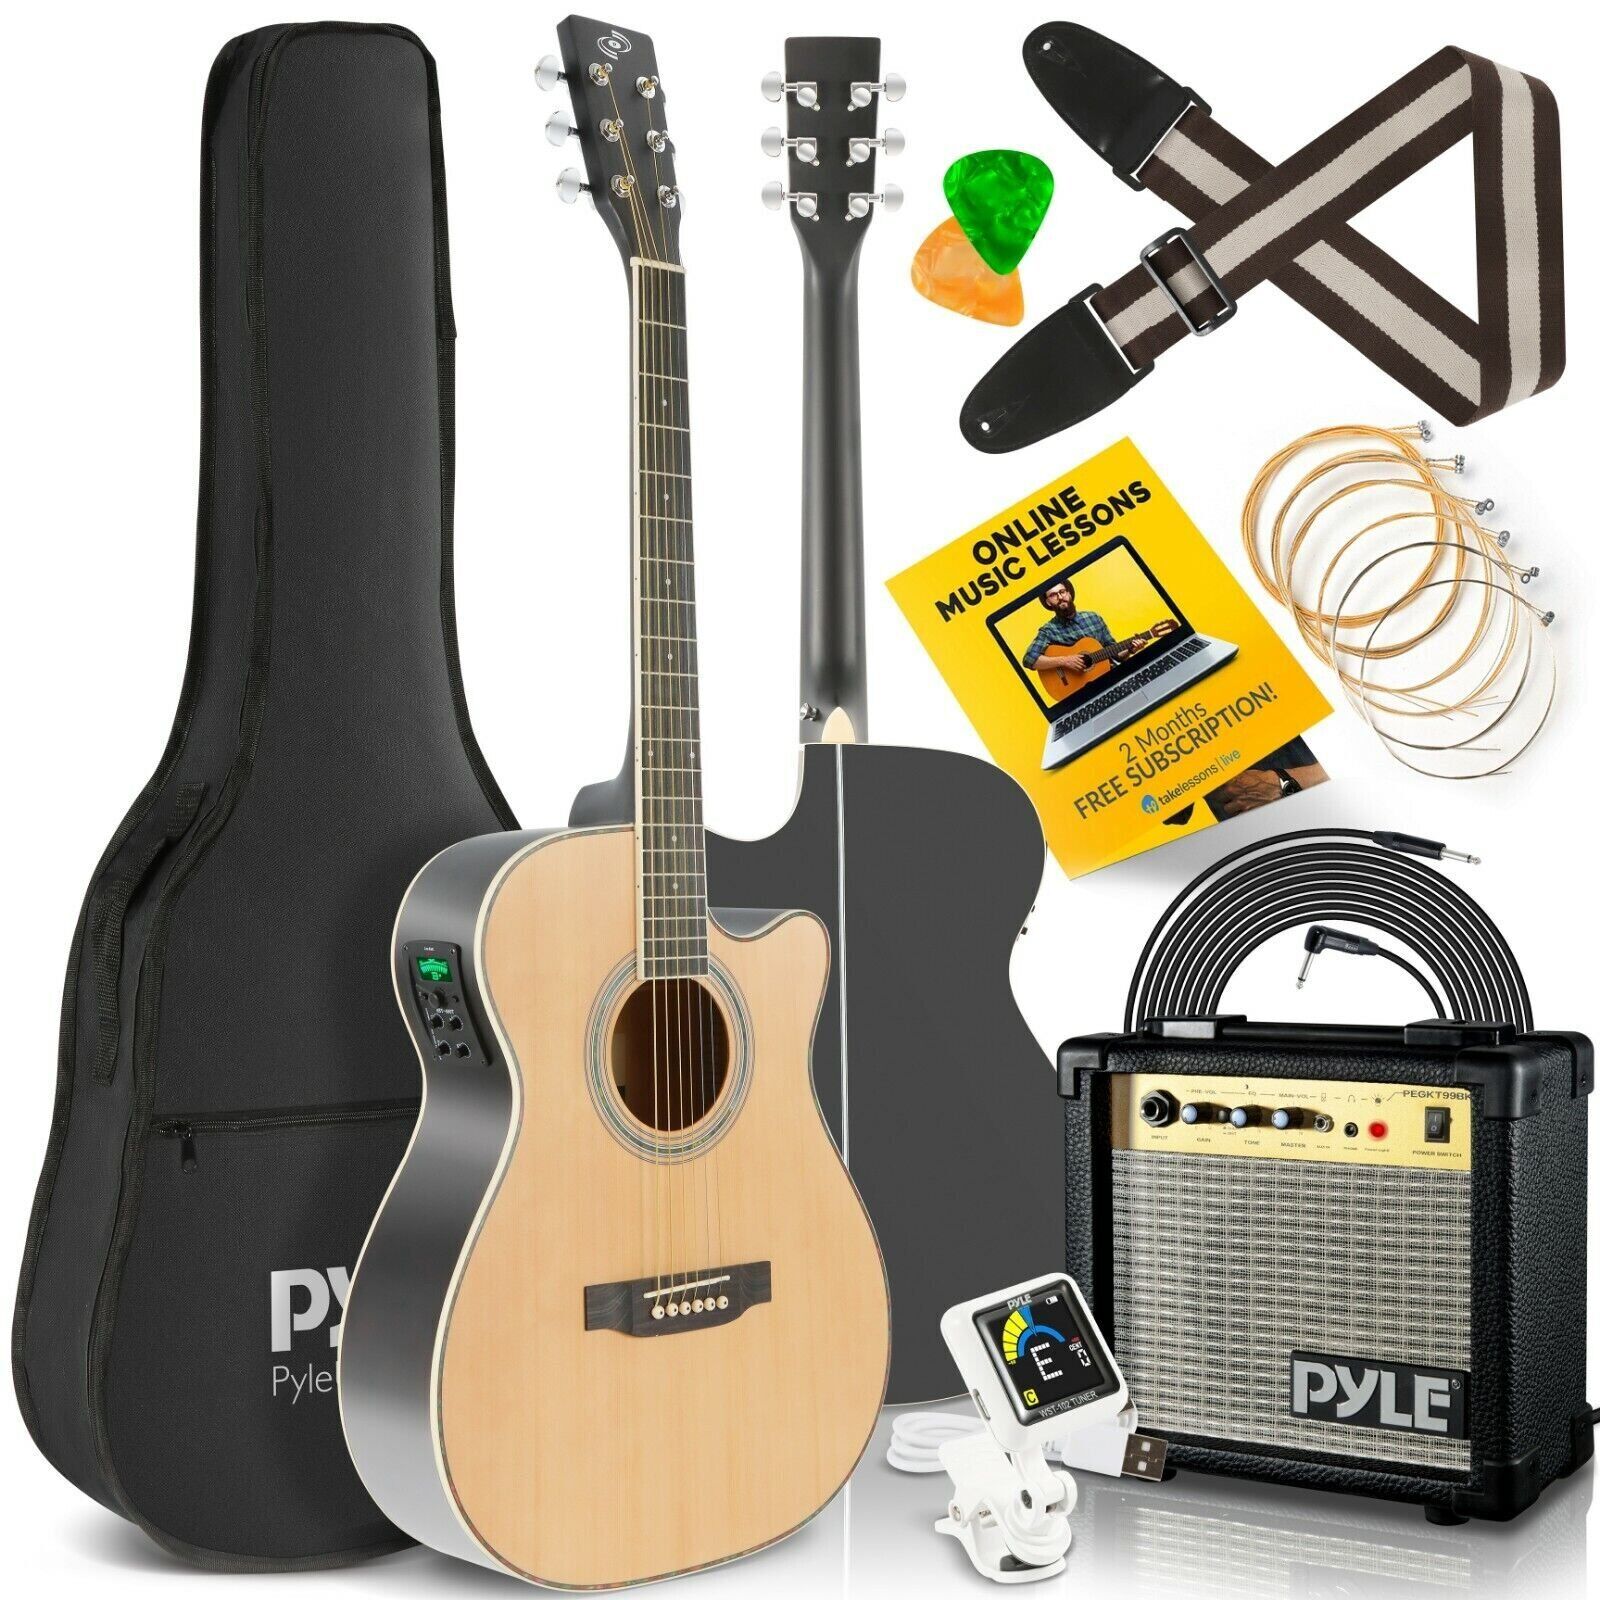 Pyle 40” Inch 6-String Electric Acoustic Guitar -W/Digital Tuner & Accessory Kit